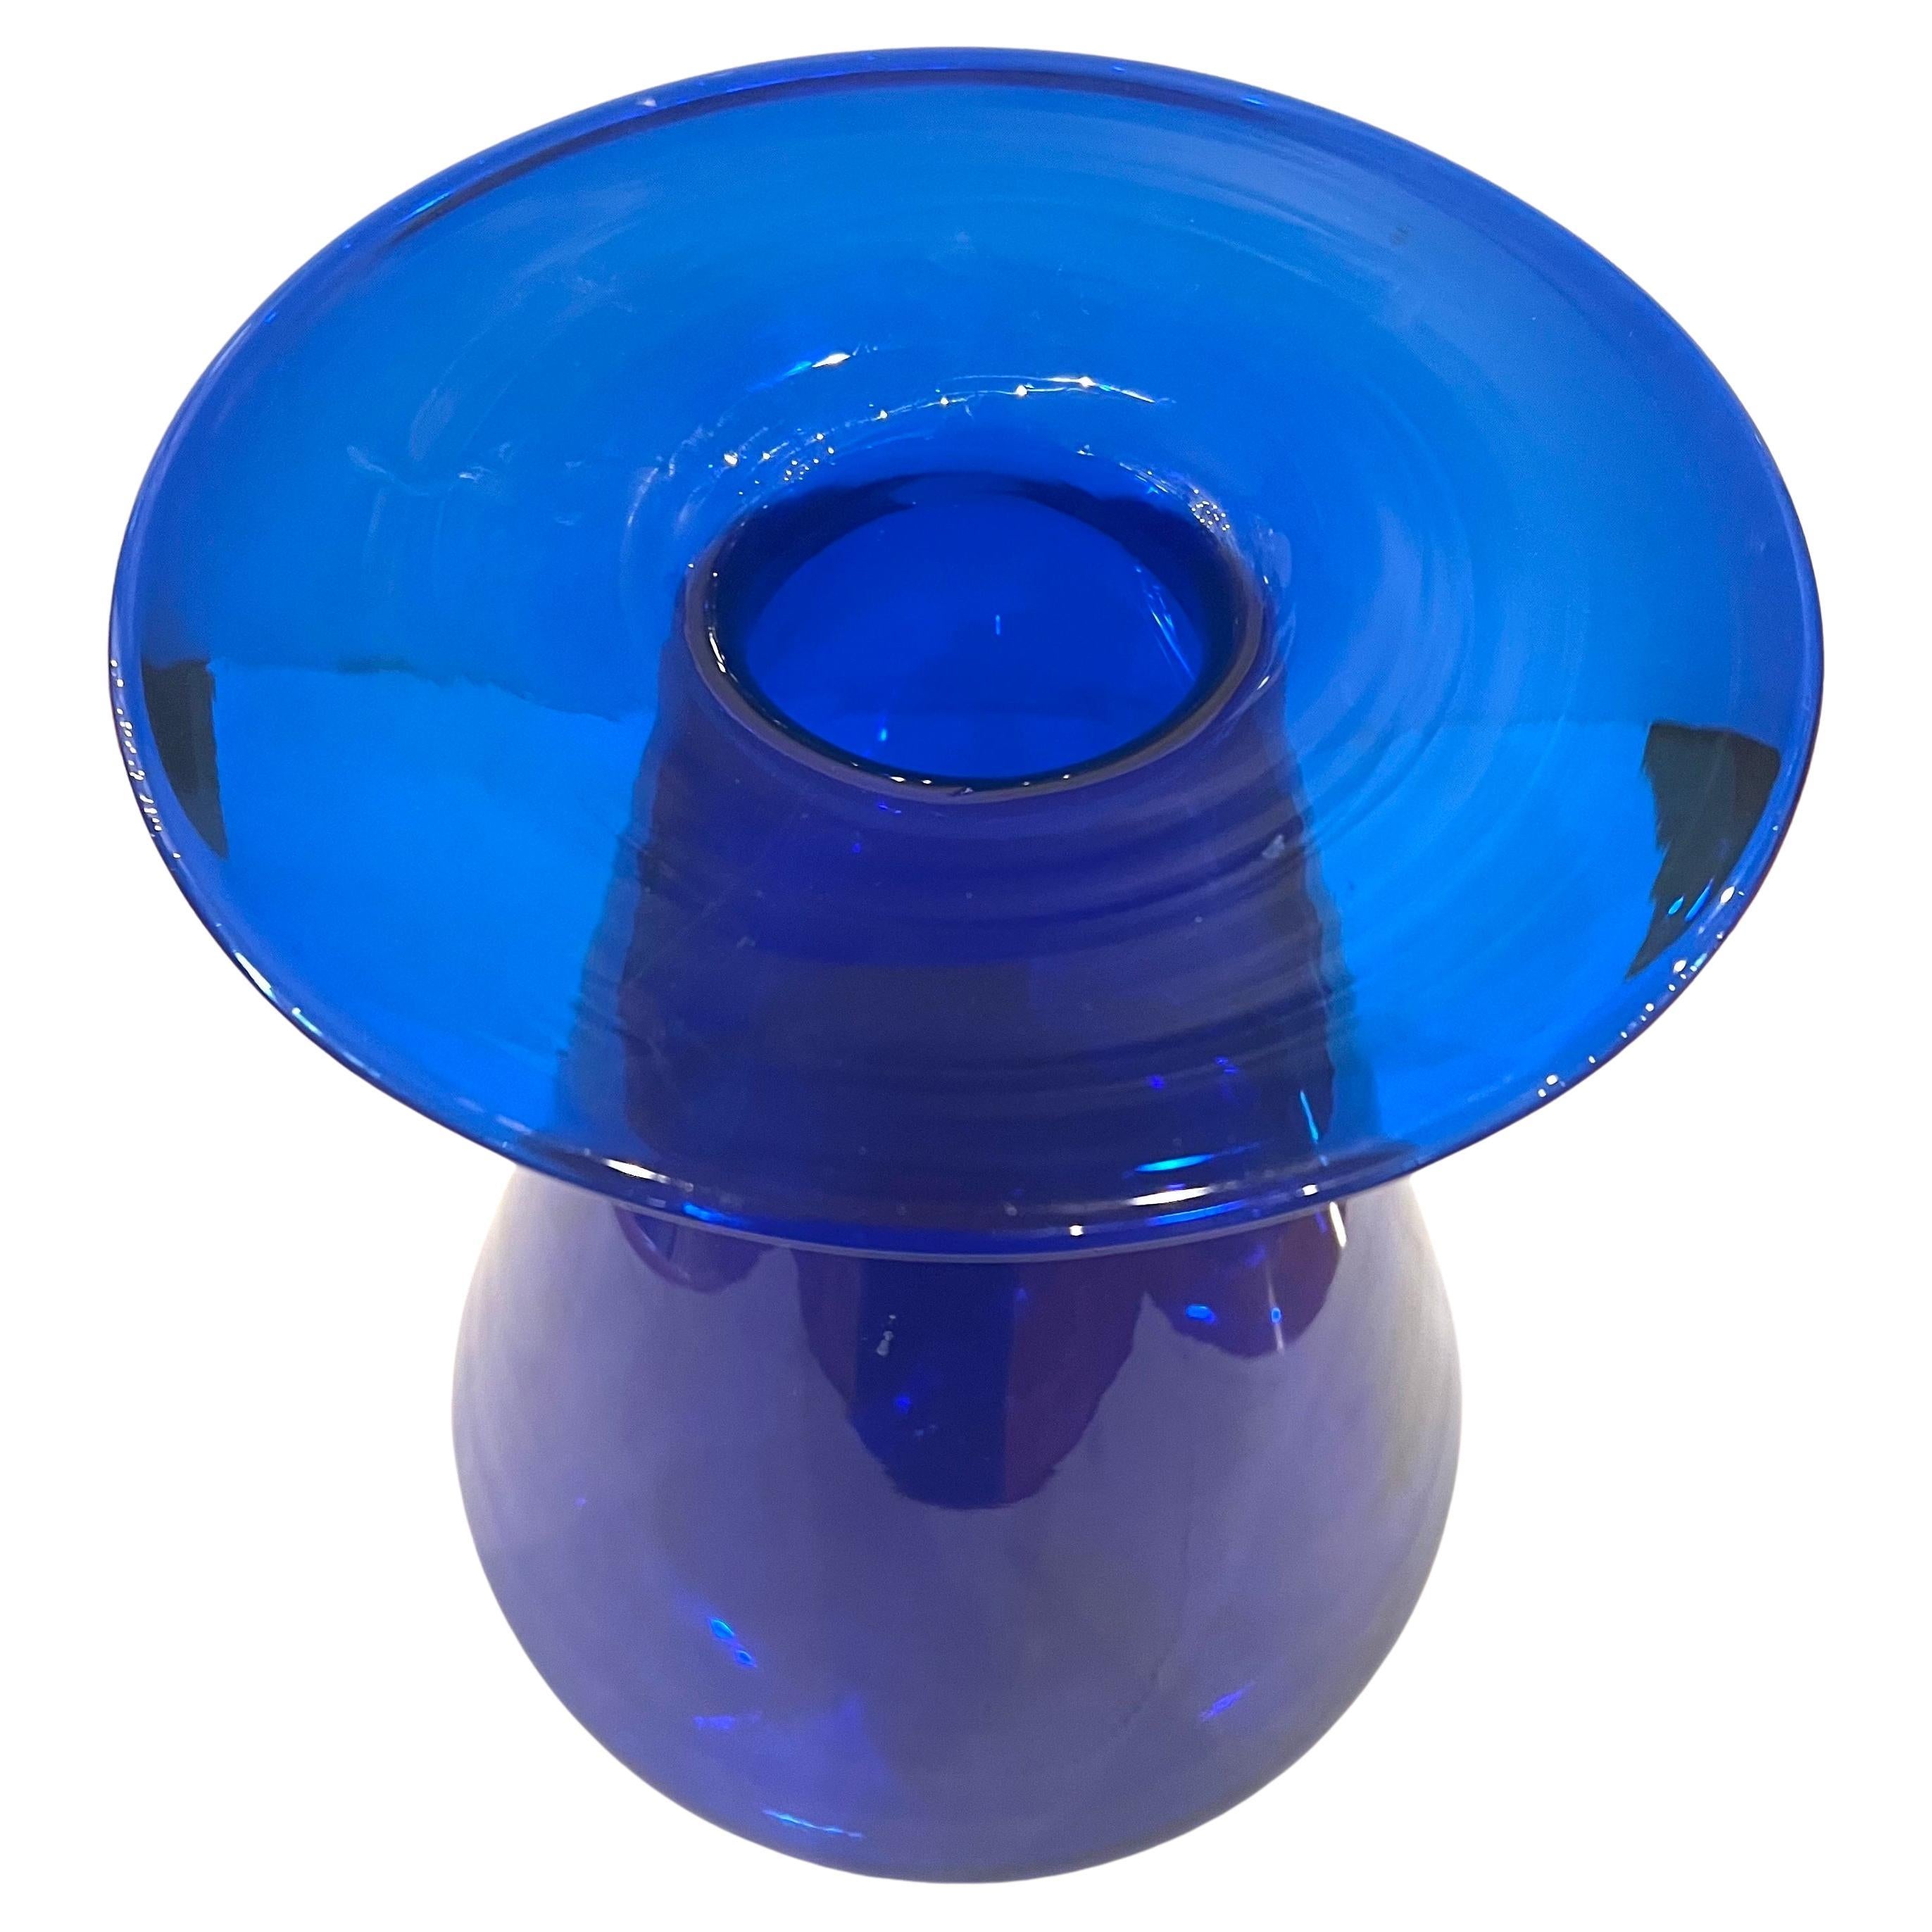 Beautiful modernist cobalt blue flower vase in great condition, no chips or cracks. circa 1980's by Blenko retains label but its worn pontile mark.